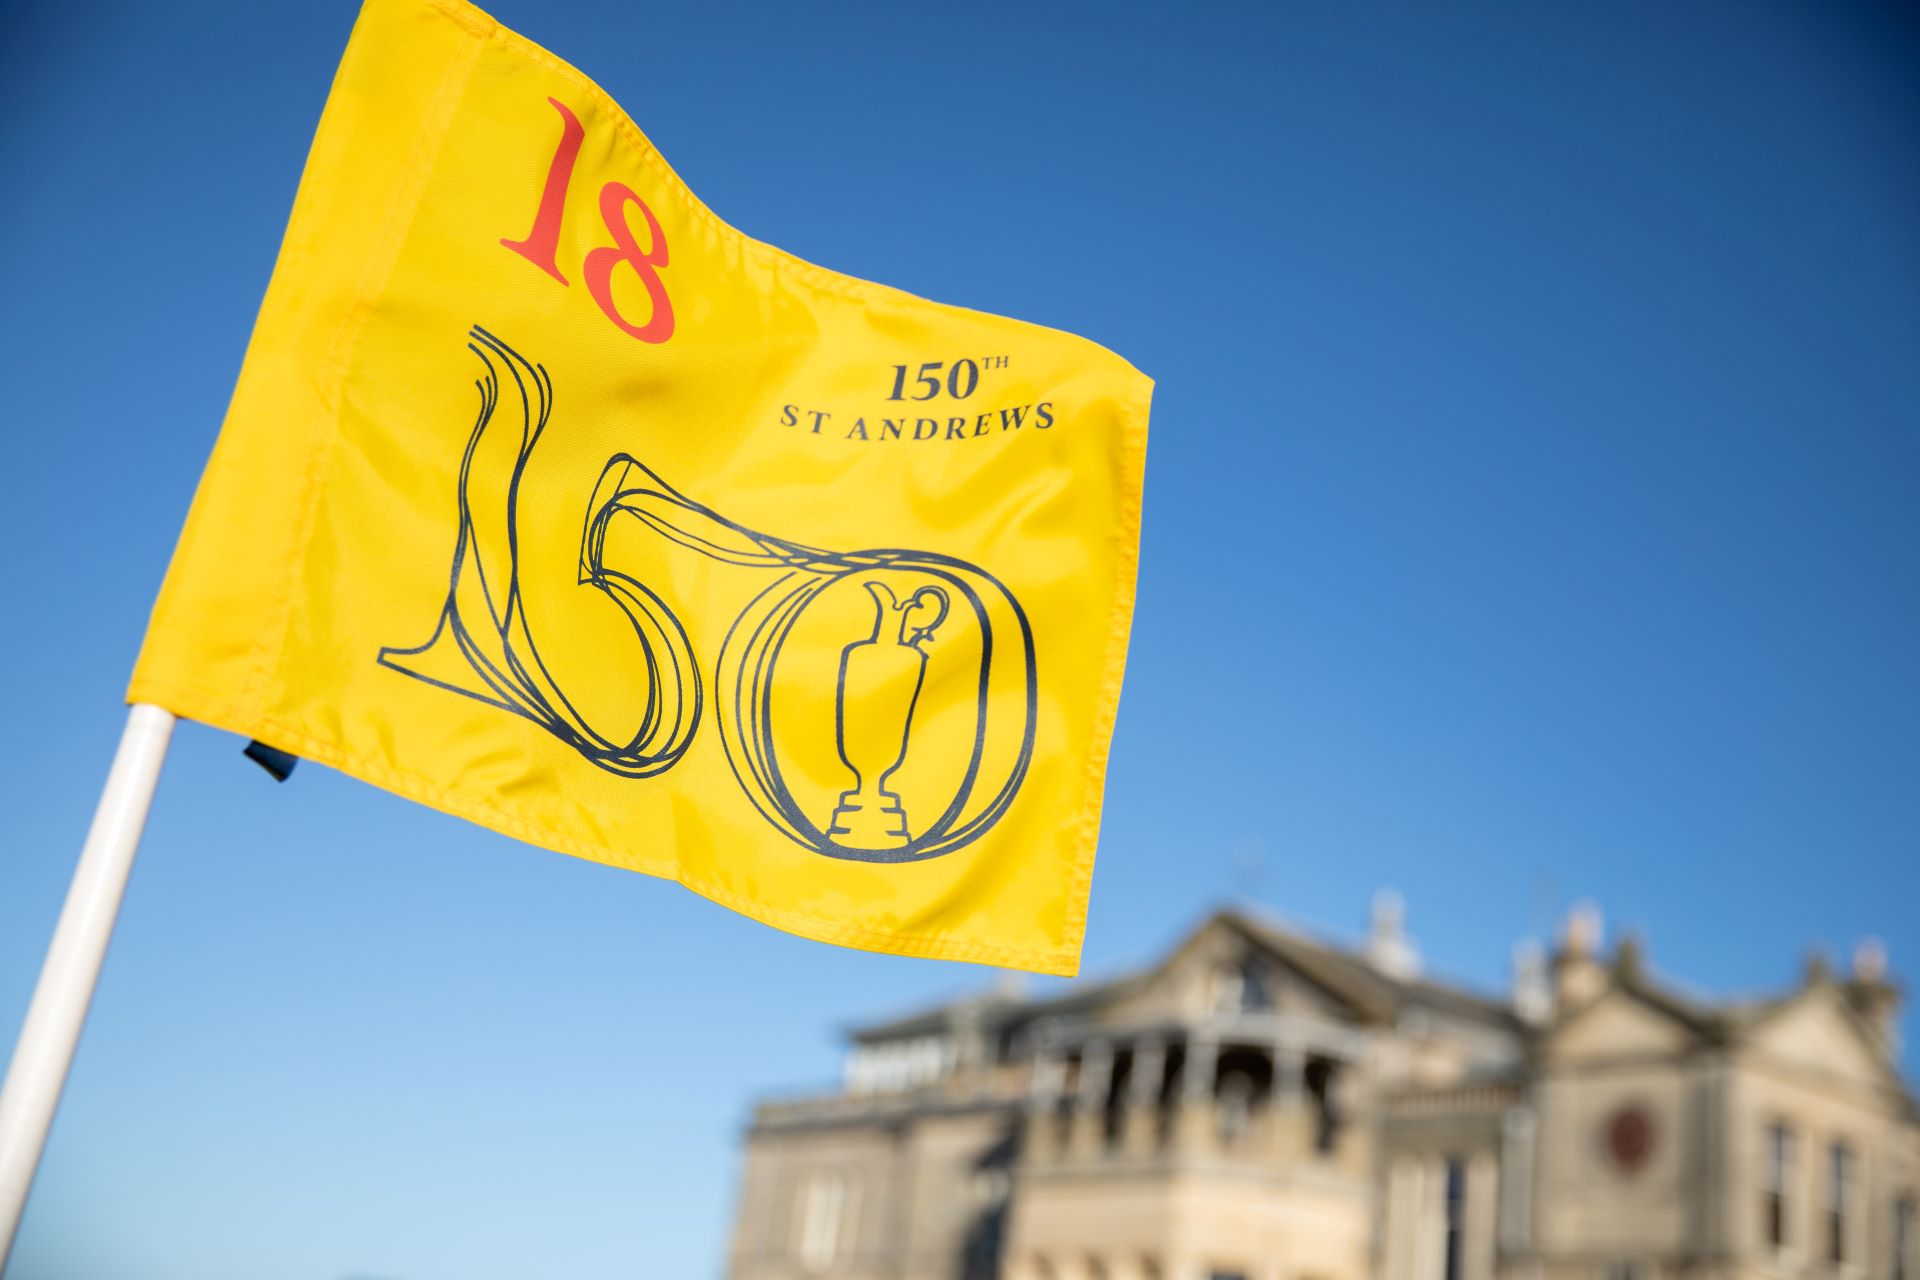 Are you coming to the 150th Open this July?